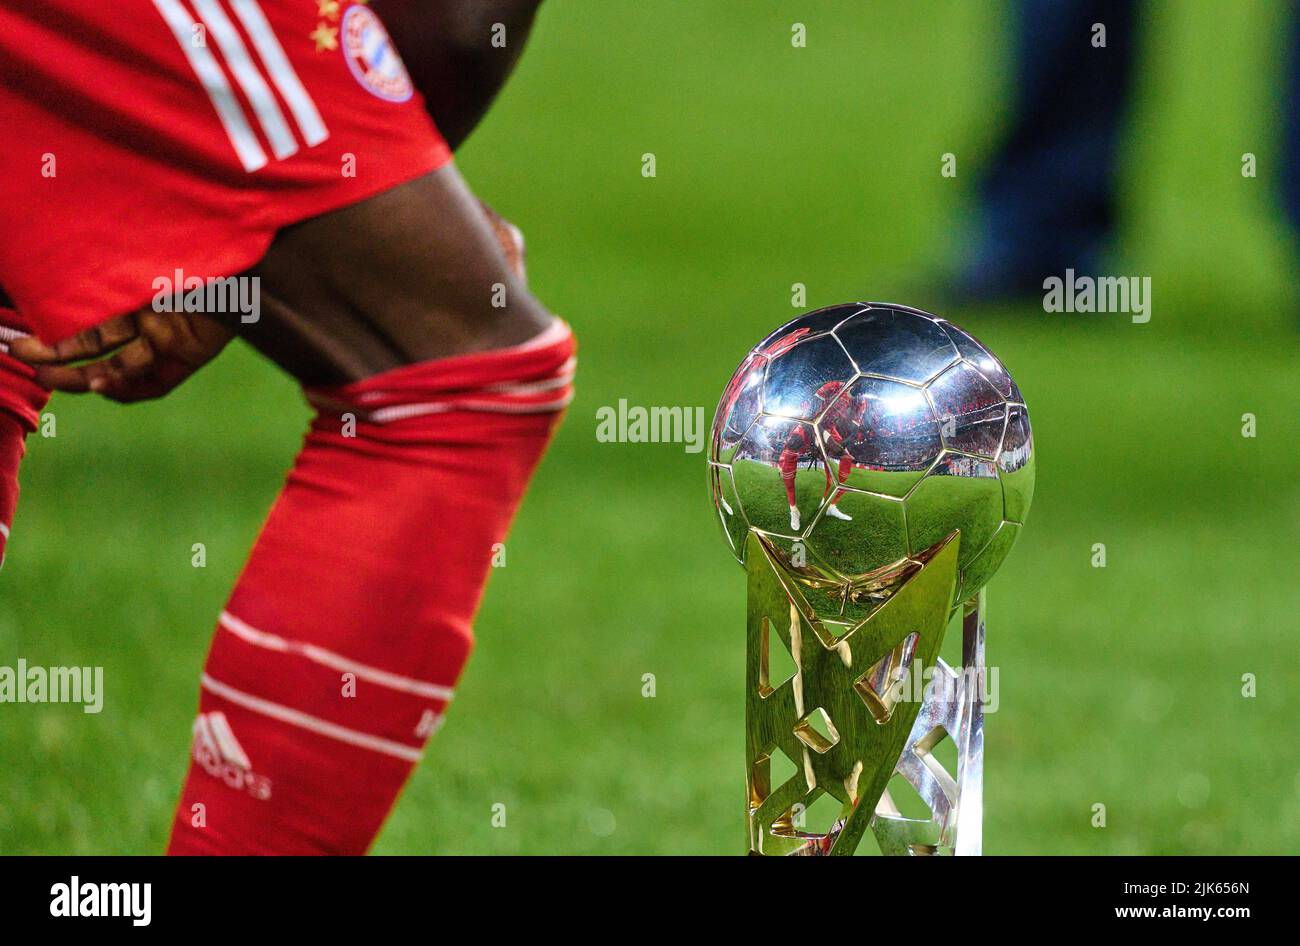 Leipzig, Germany. 30th July, 2022. Sadio Mane (FCB 17)   at winner ceremony with team mates after the match RB LEIPZIG - FC BAYERN MÜNCHEN 3-5 DFL SUPERCUP, 1. German Football League,  in Leipzig, July 30, 2022  Season 2022/2023 © Peter Schatz / Alamy Live News Credit: Peter Schatz/Alamy Live News Stock Photo